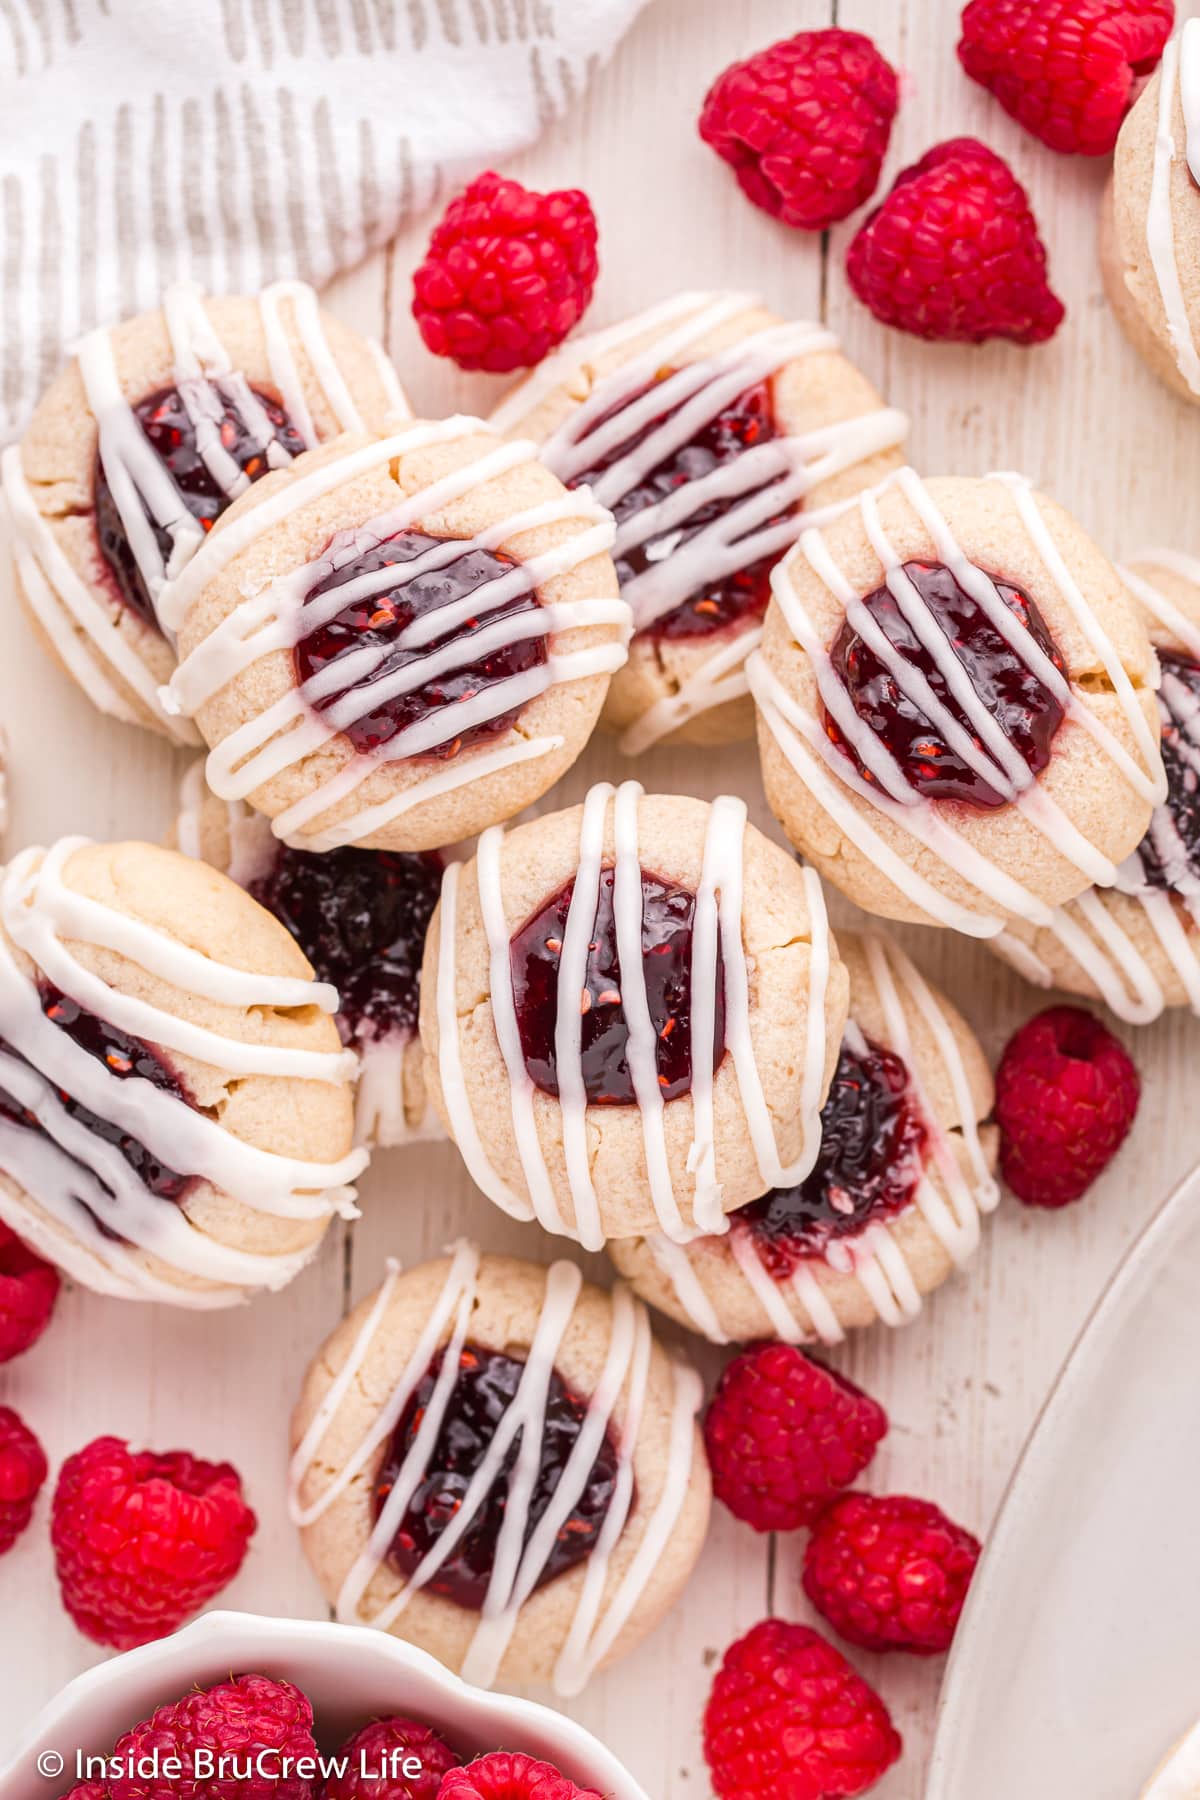 Raspberry filled shortbread cookies on a tray.